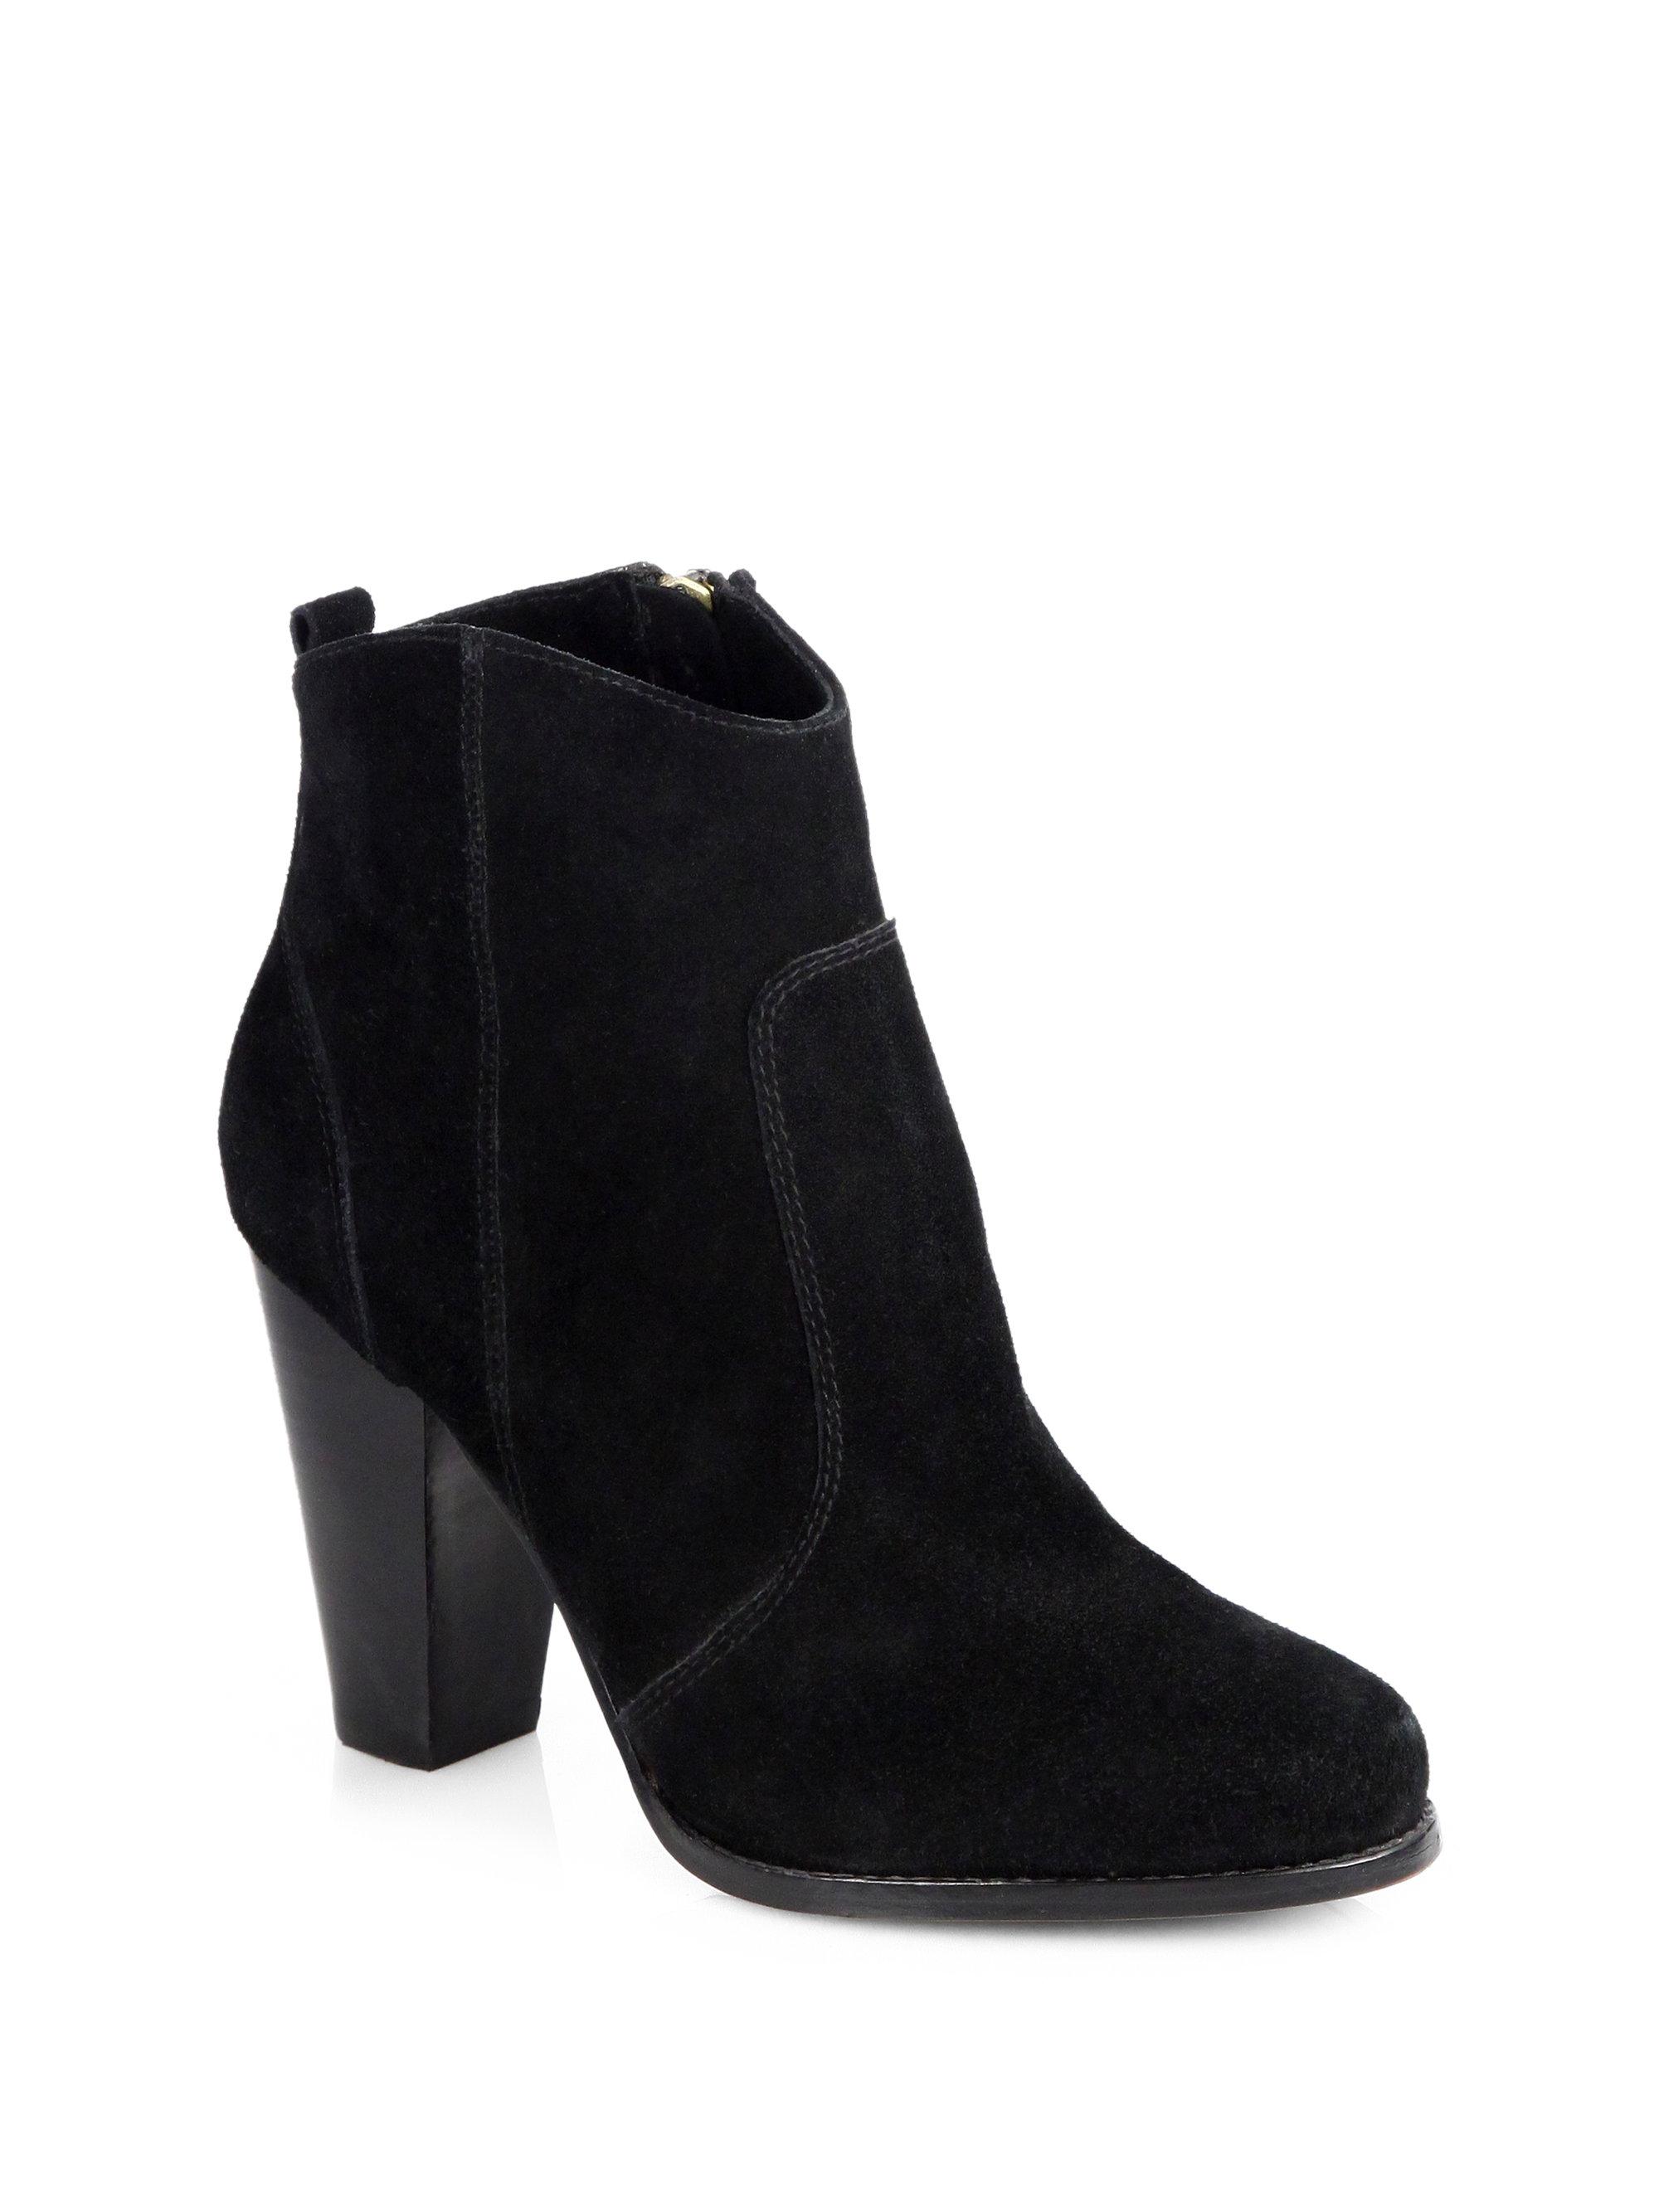 Joie Dalton Suede Ankle Boots in Black - Save 60% | Lyst